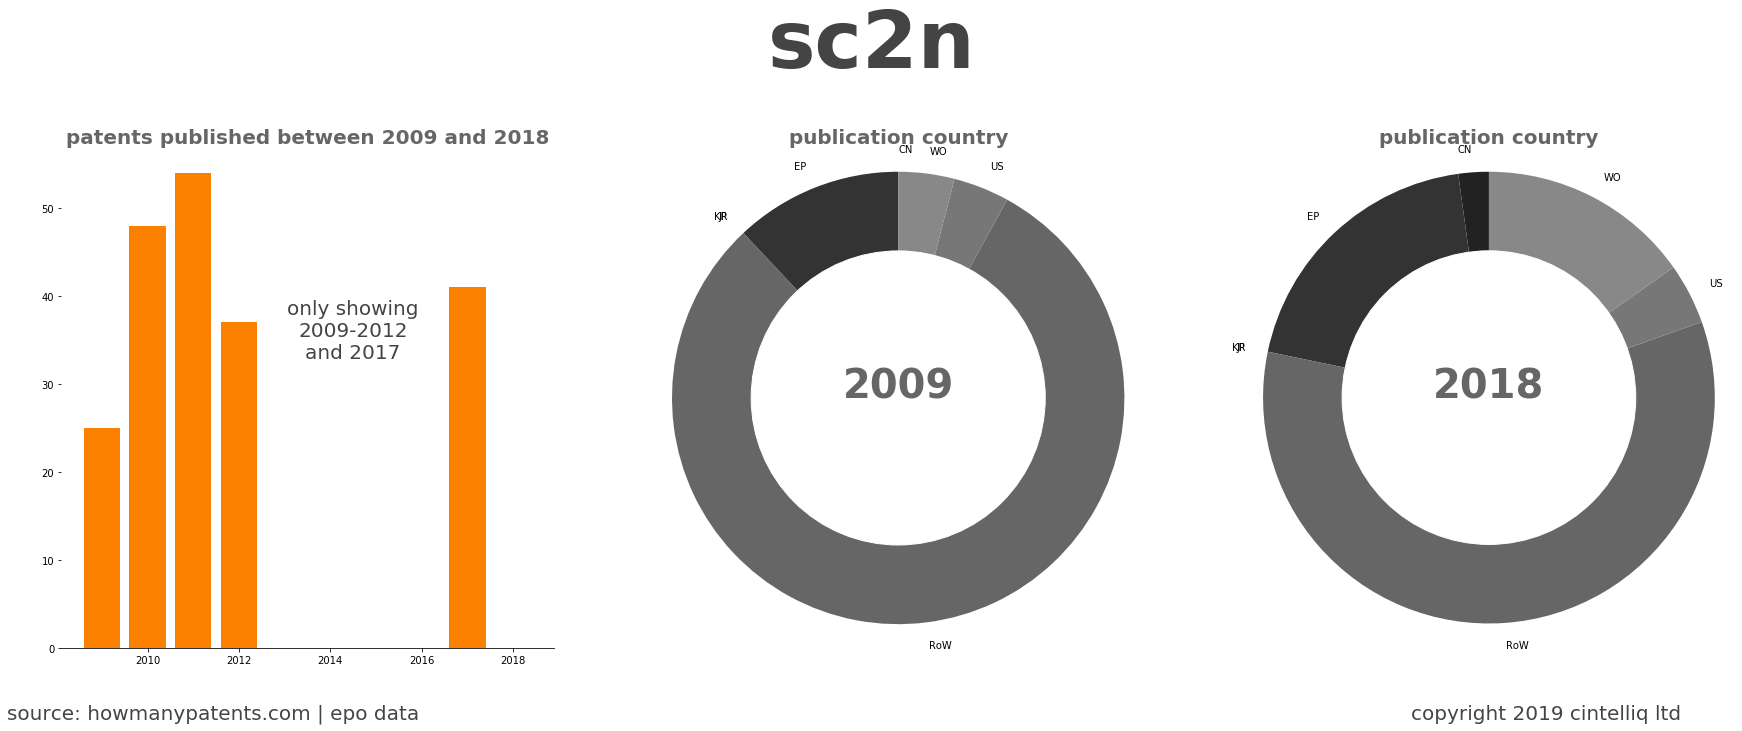 summary of patents for Sc2N